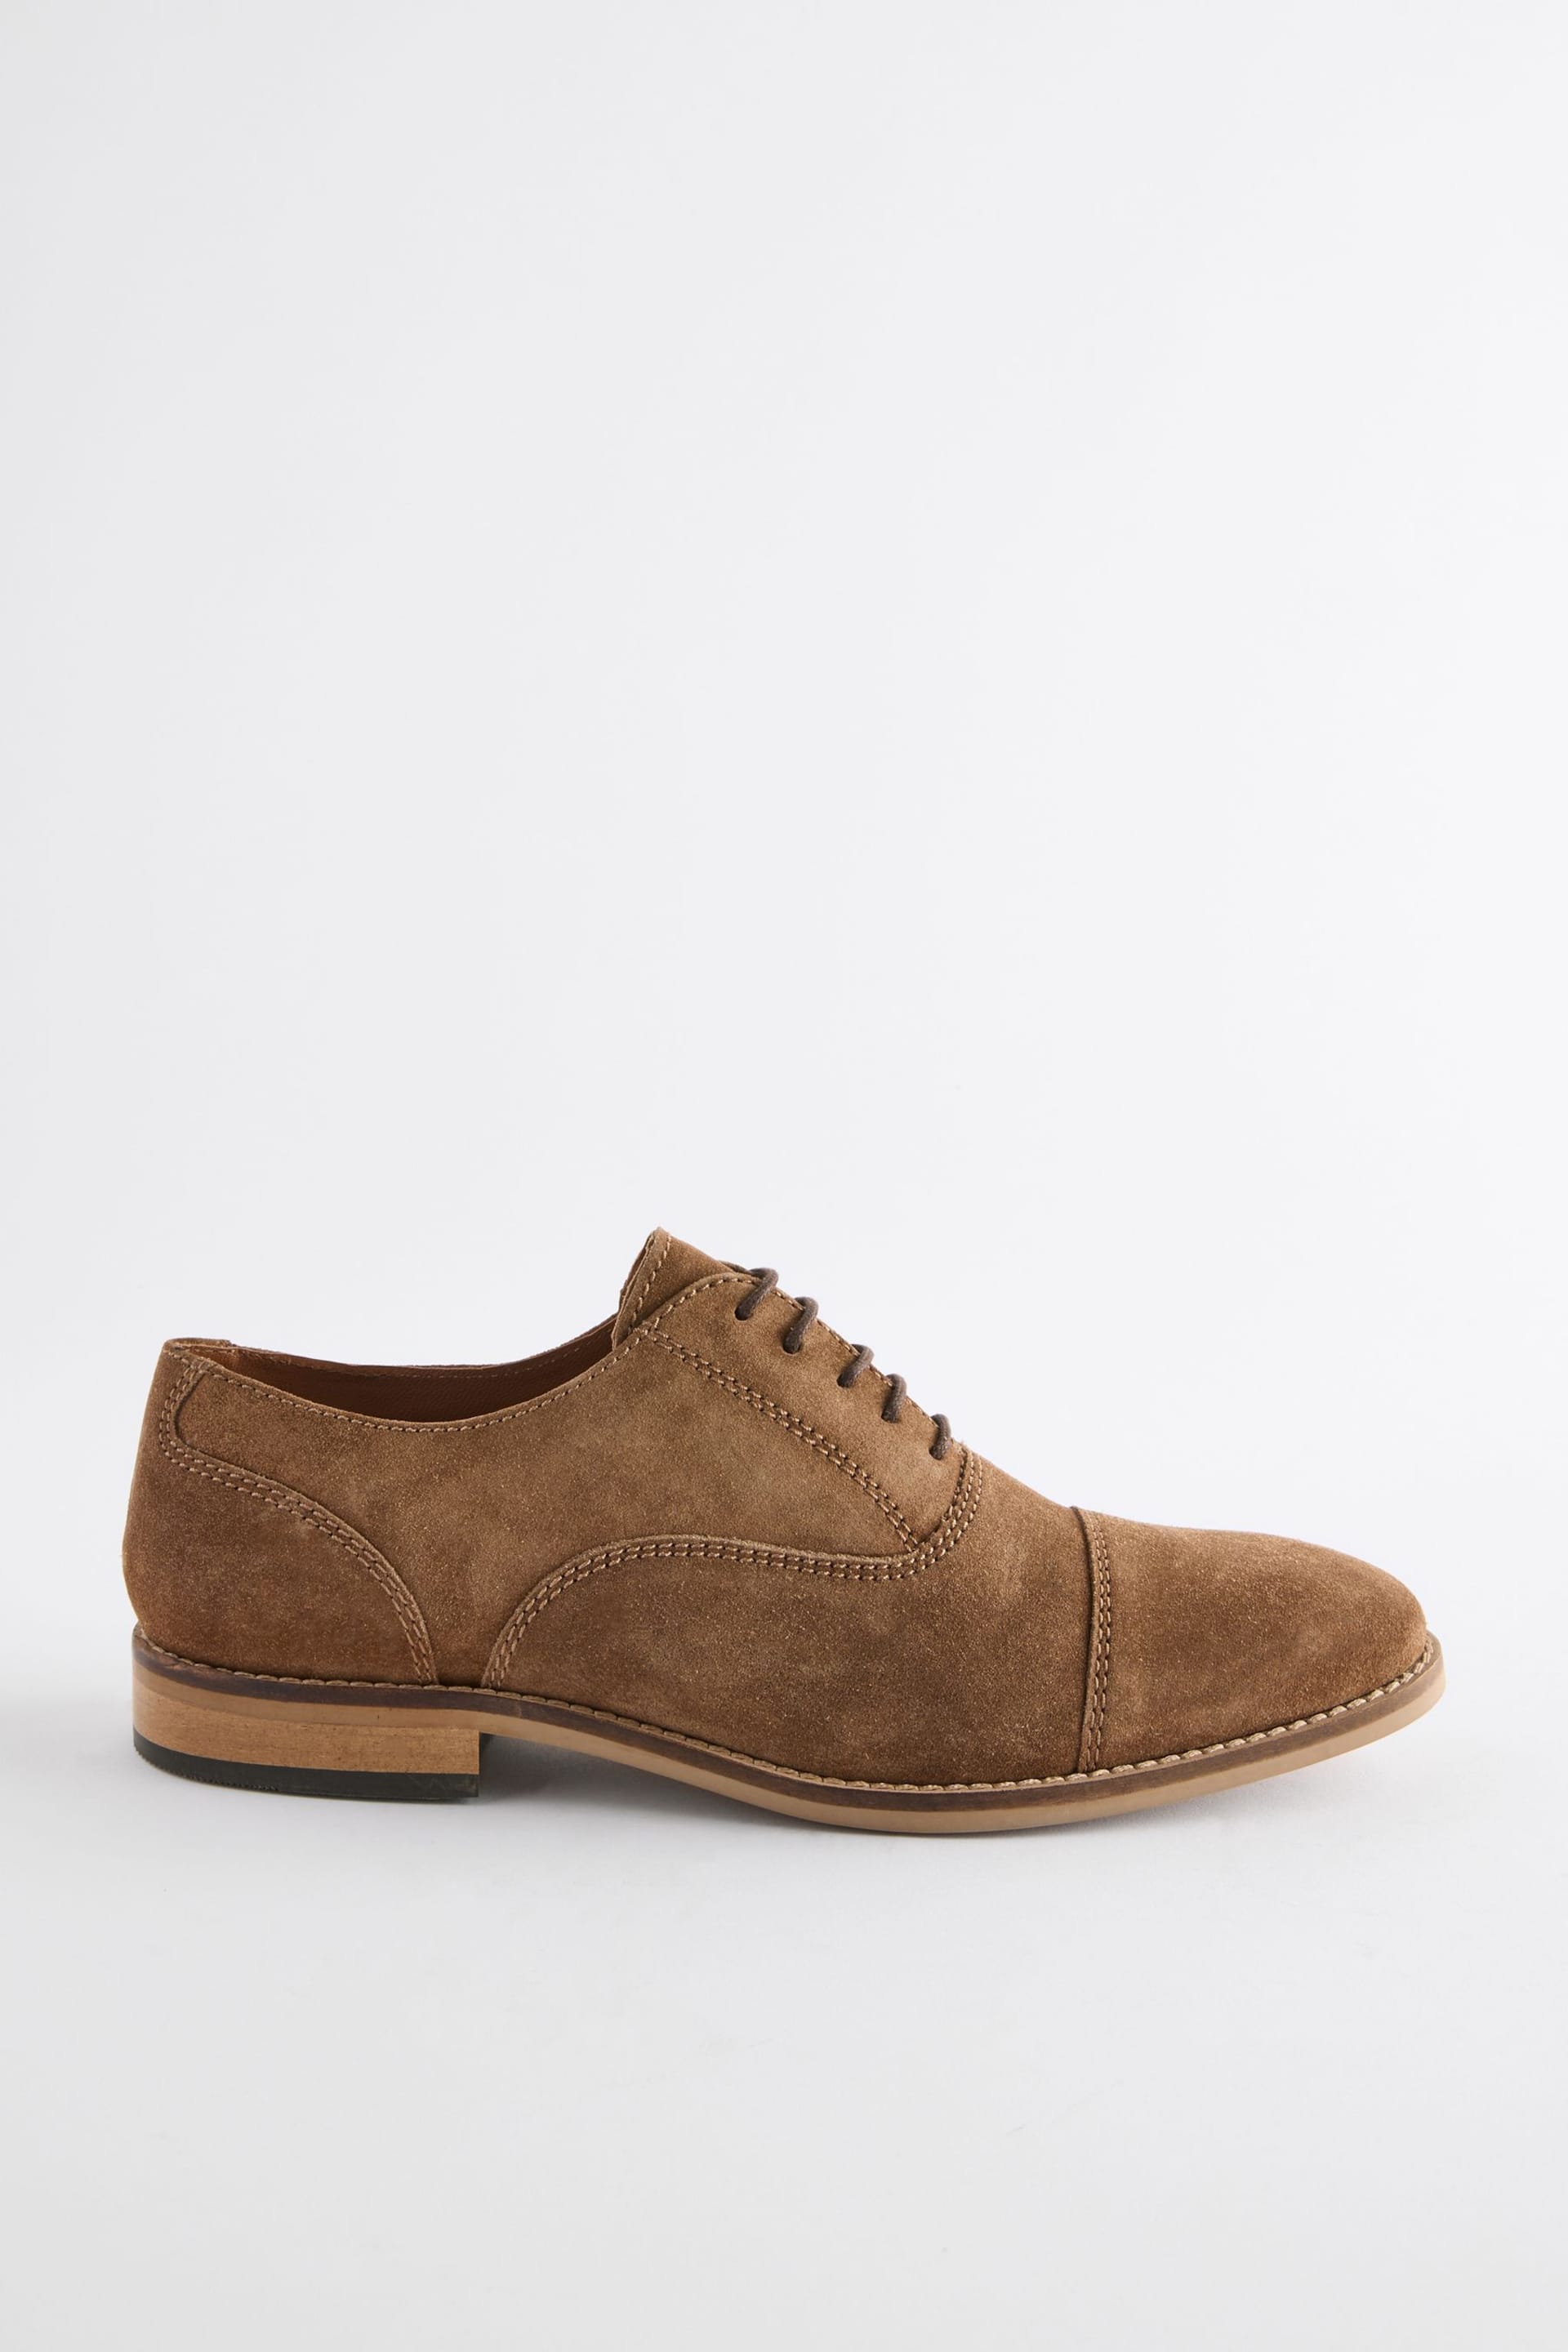 Stone Suede Contrast Sole Toecap Shoes - Image 3 of 6